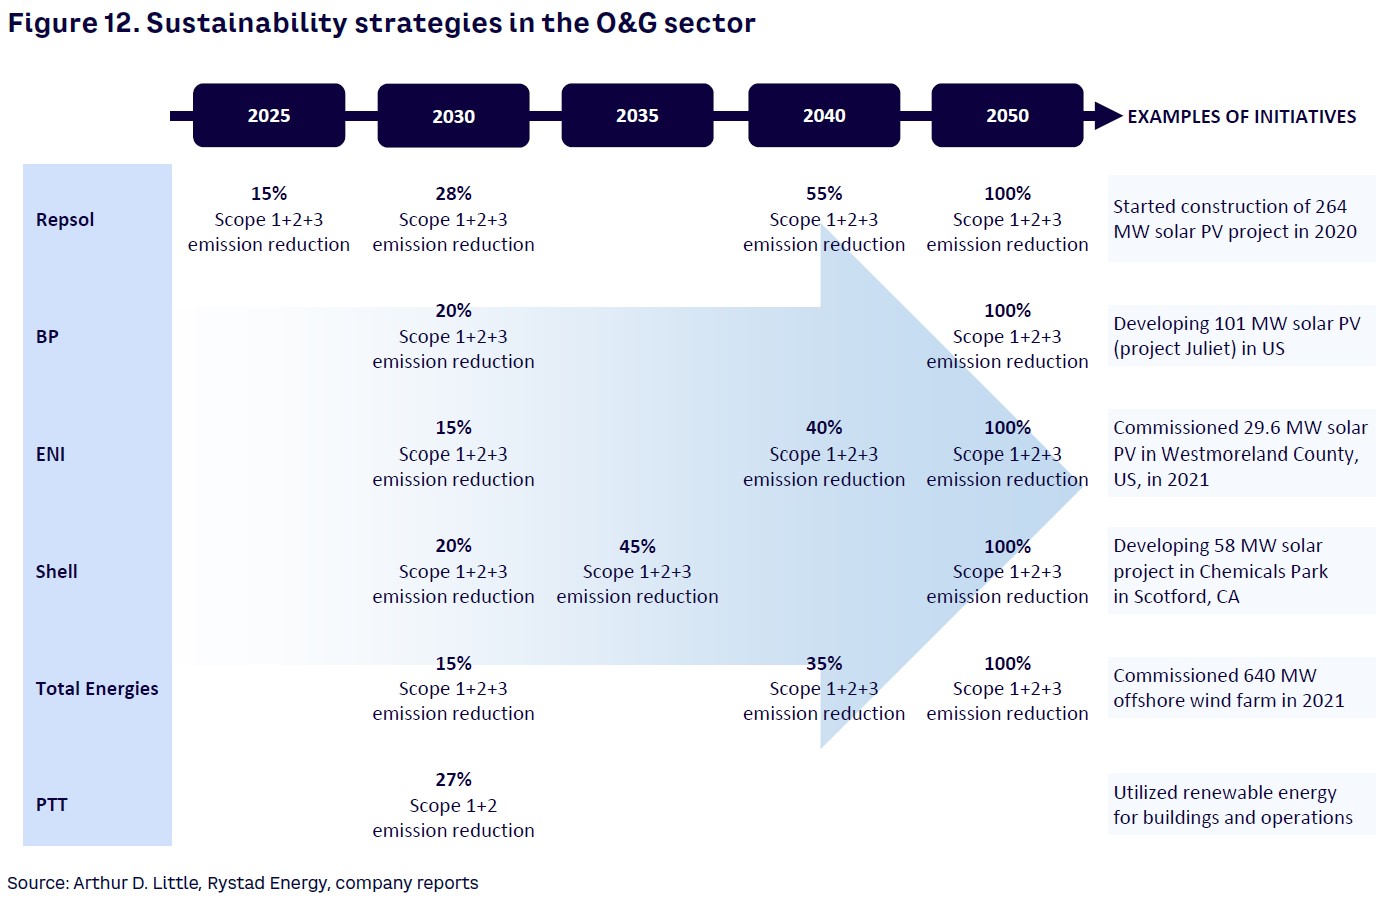 Figure 12. Sustainability strategies in the O&G sector